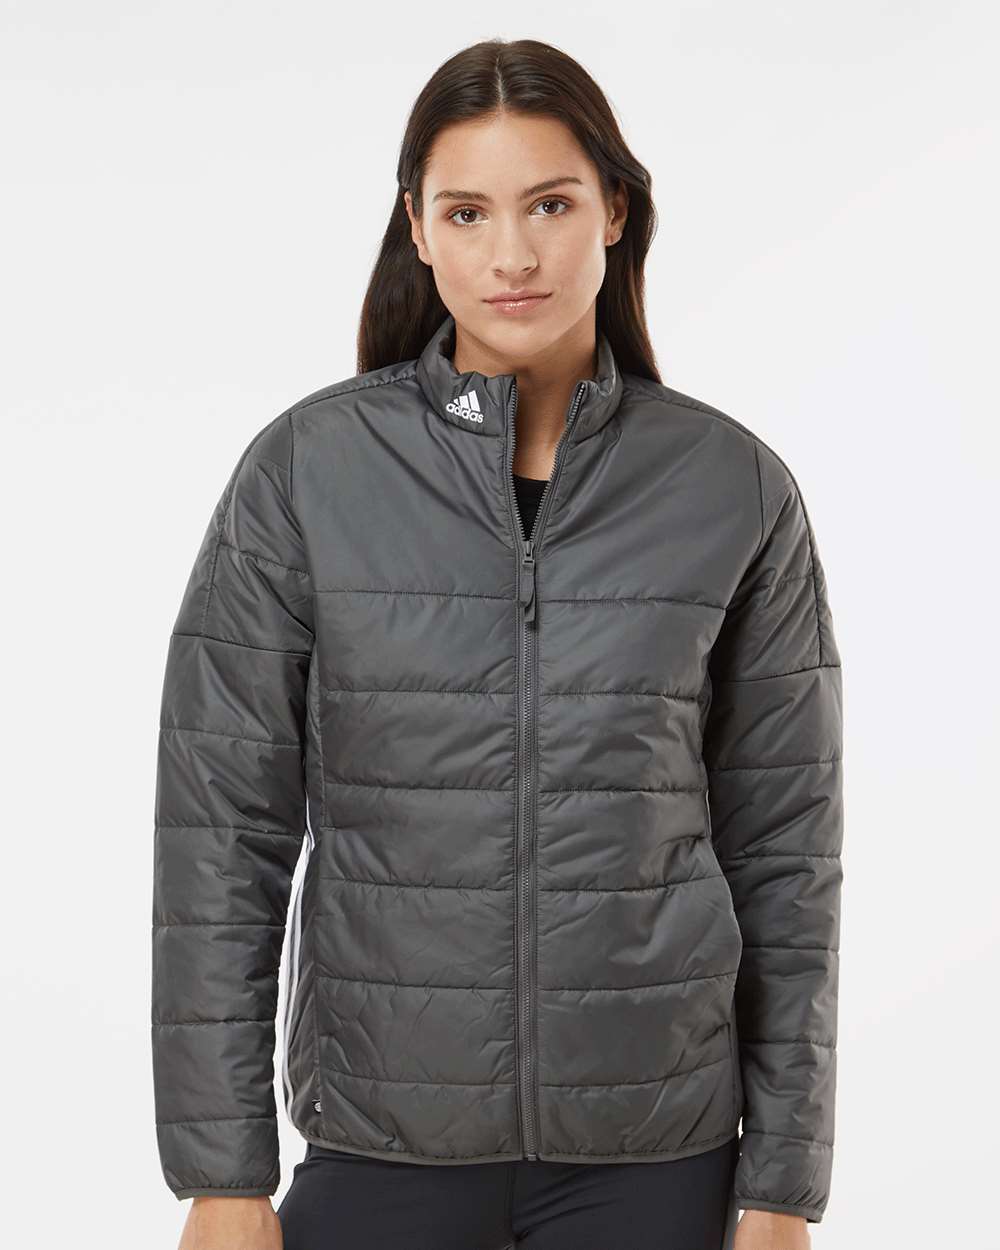 Adidas A571 Women's Puffer Jacket #colormdl_Grey Five